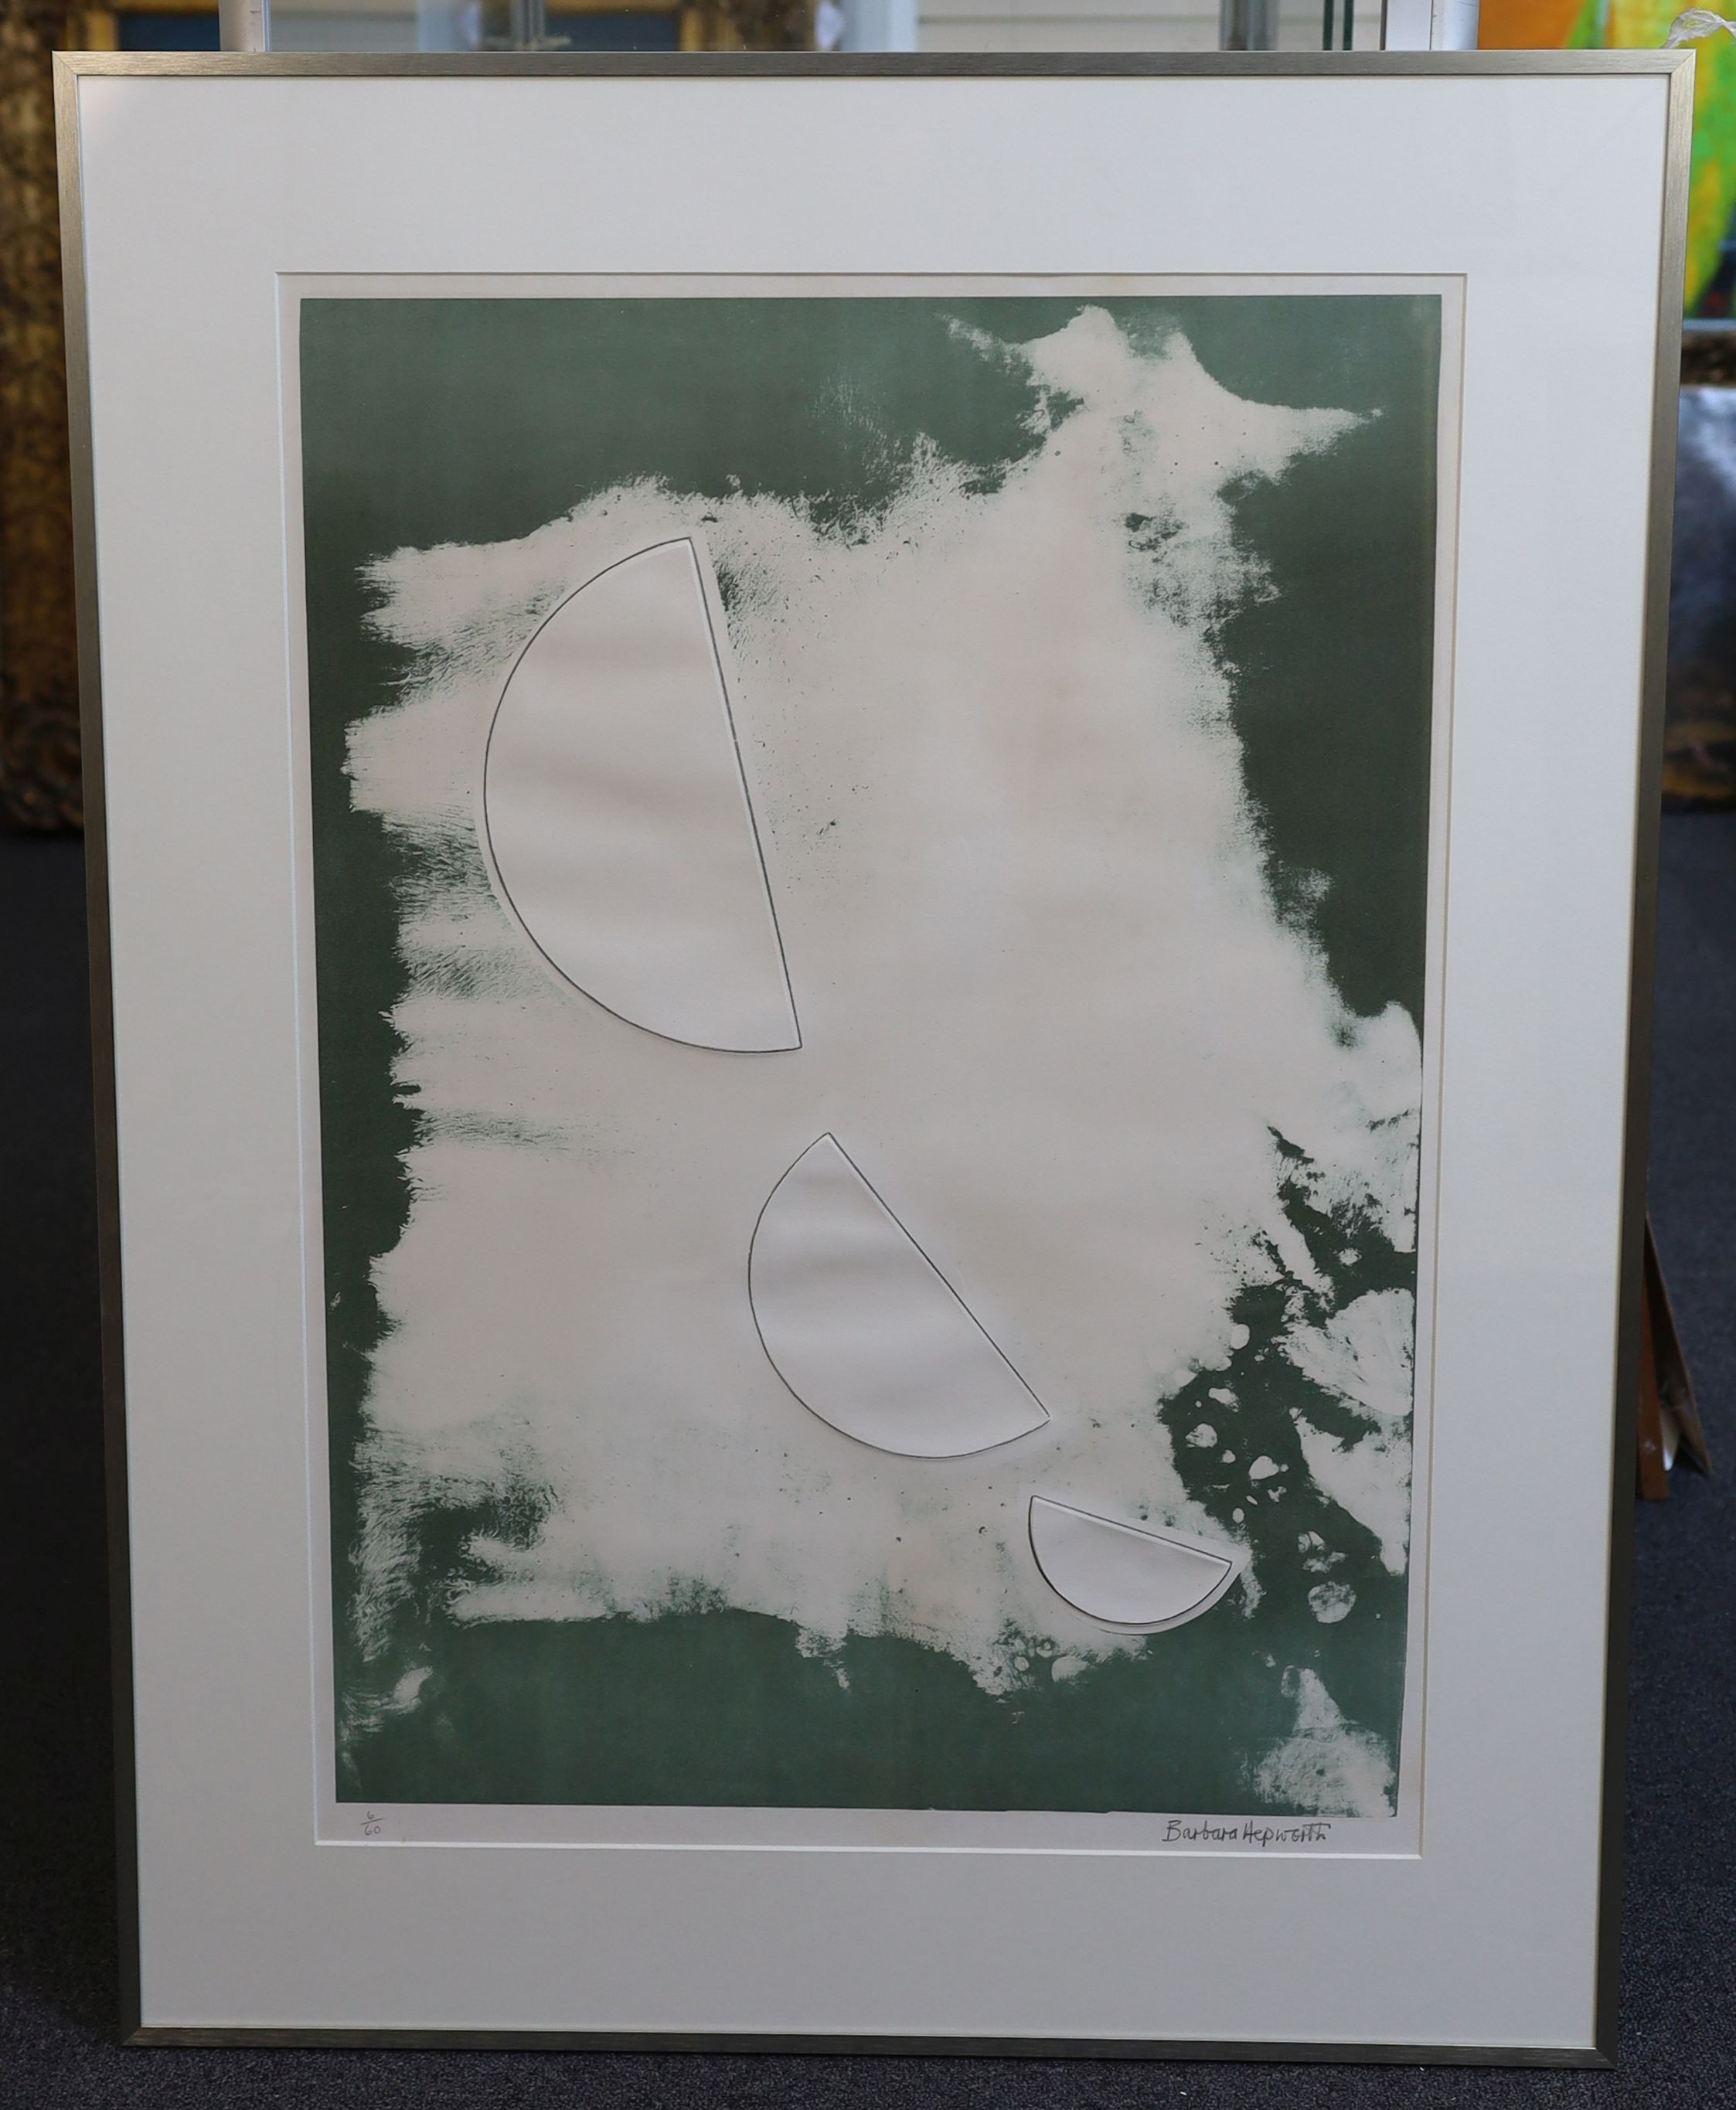 Dame Barbara Hepworth (1903-1975), 'Desert Forms' from the Aegean Suite, lithograph, 79 x 56cm